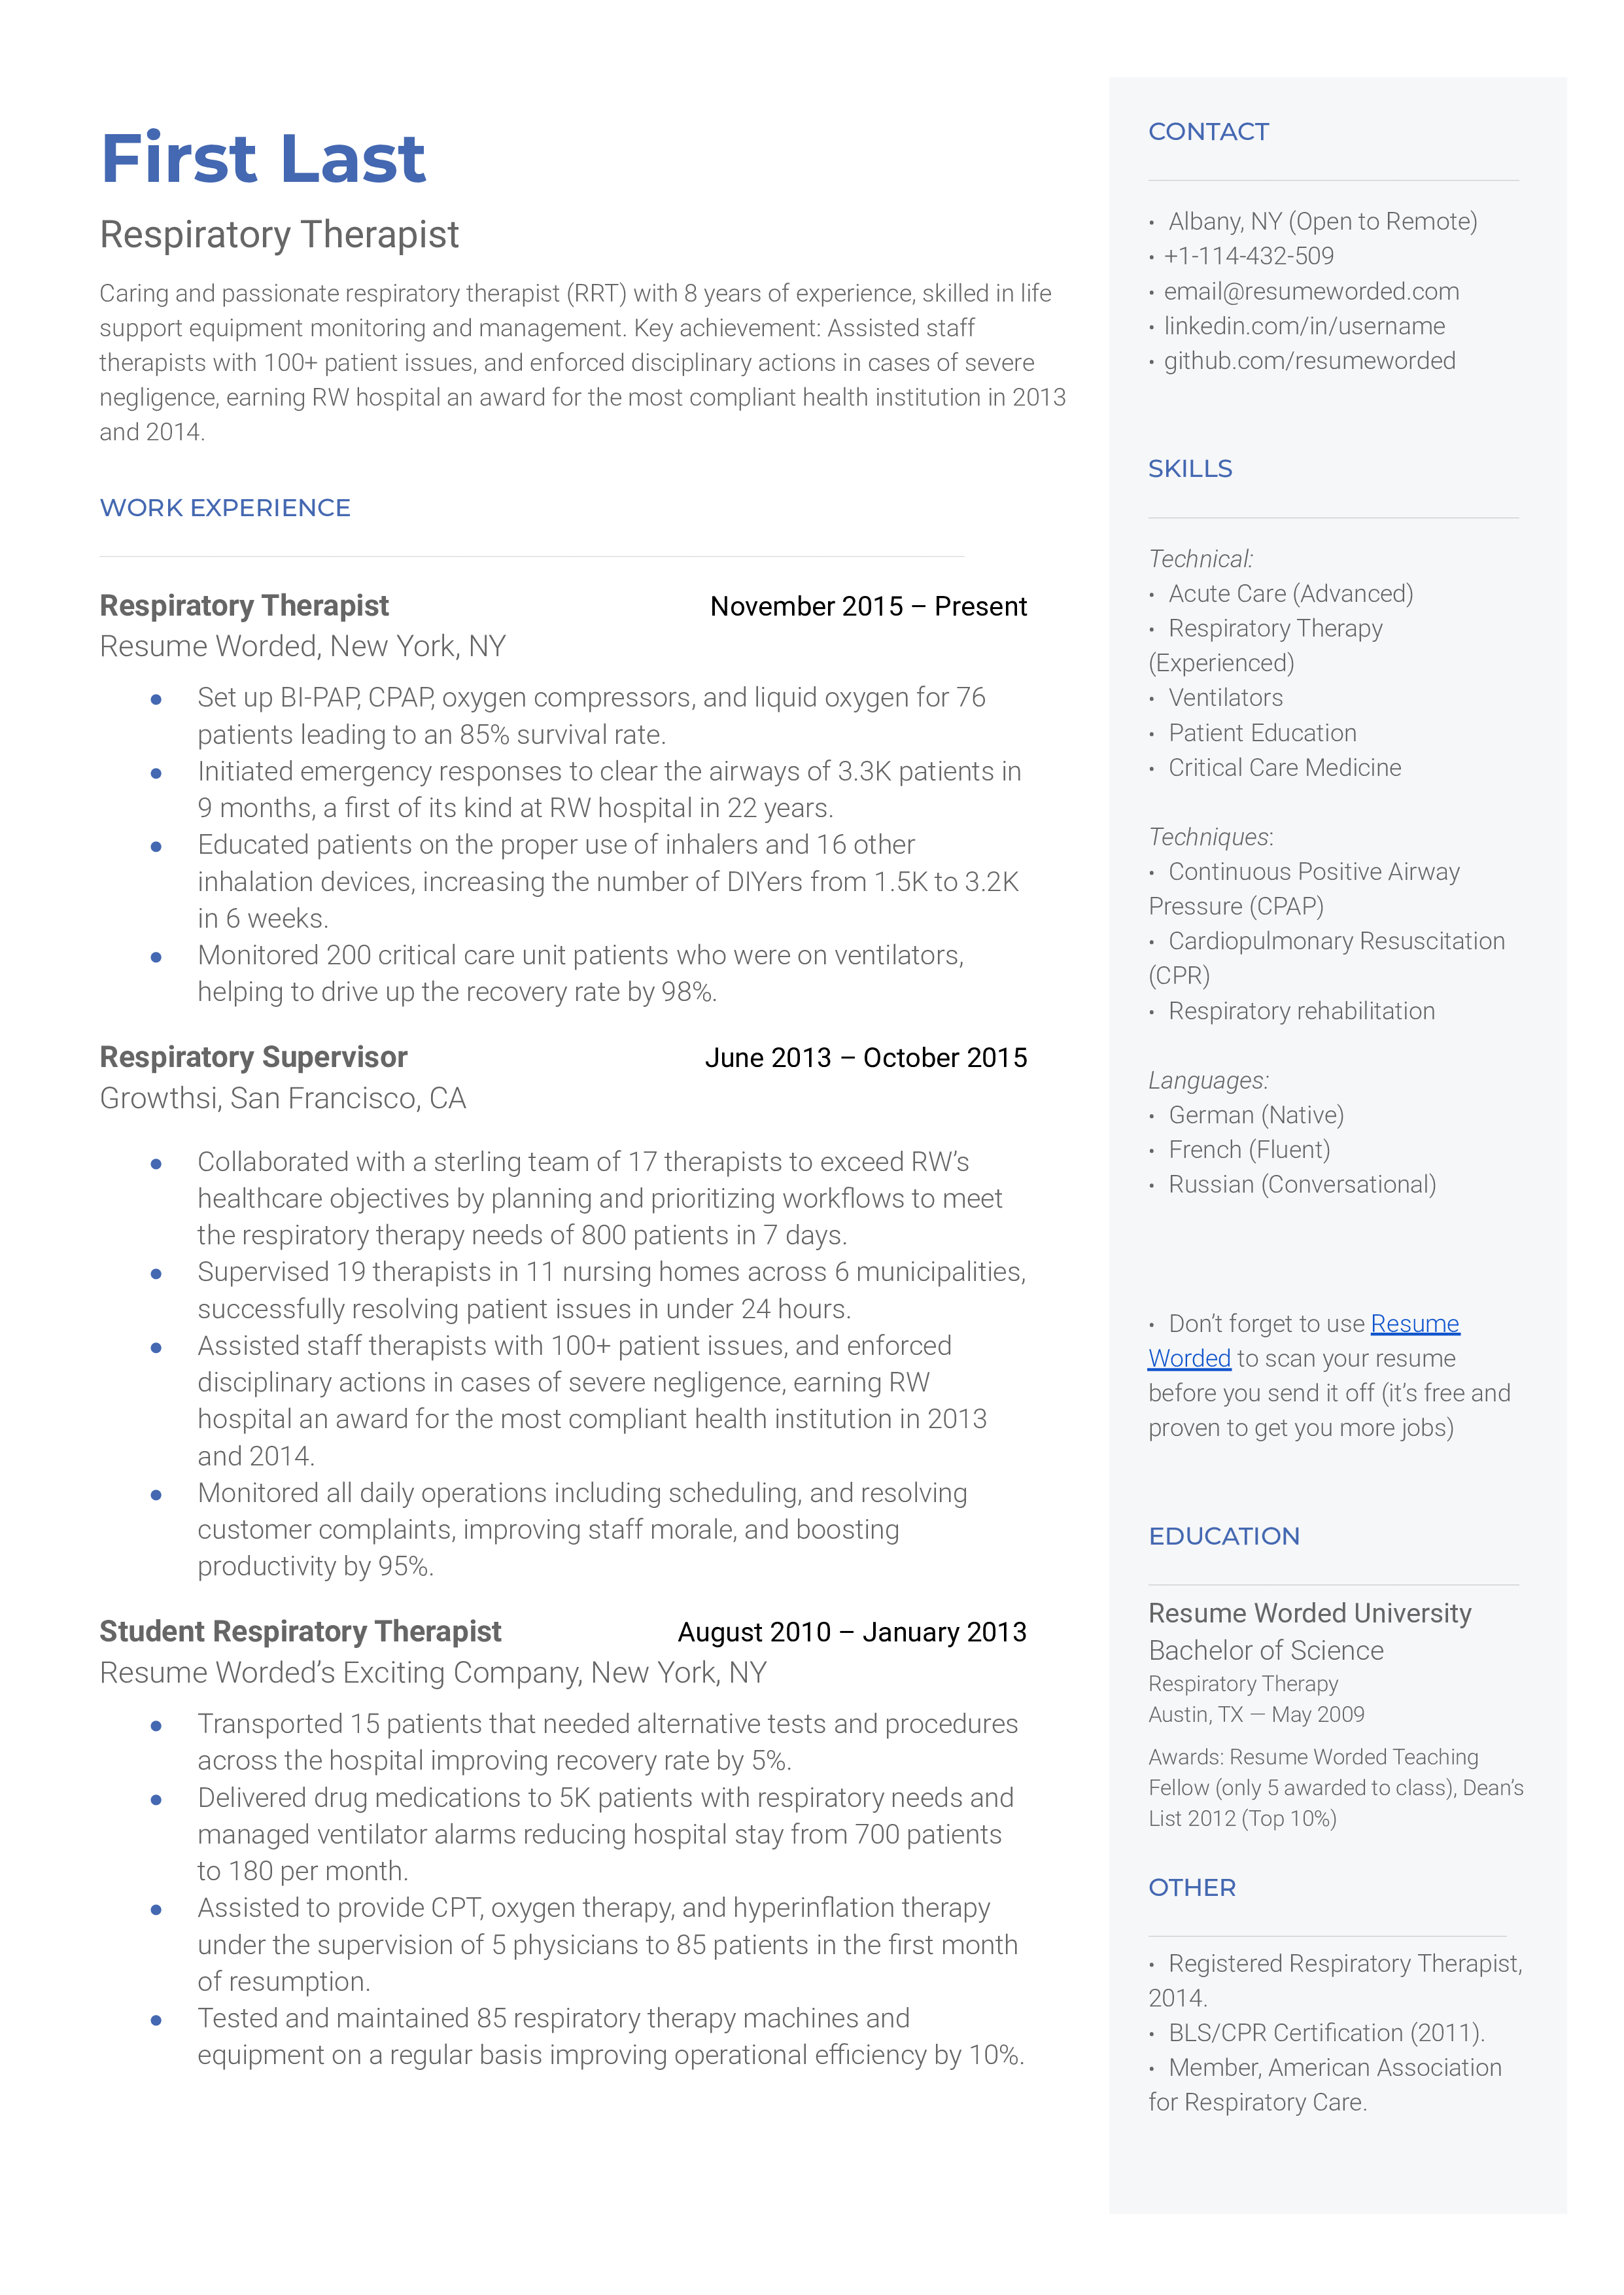 A Respiratory Therapist resume highlighting work experience and top RT skills.